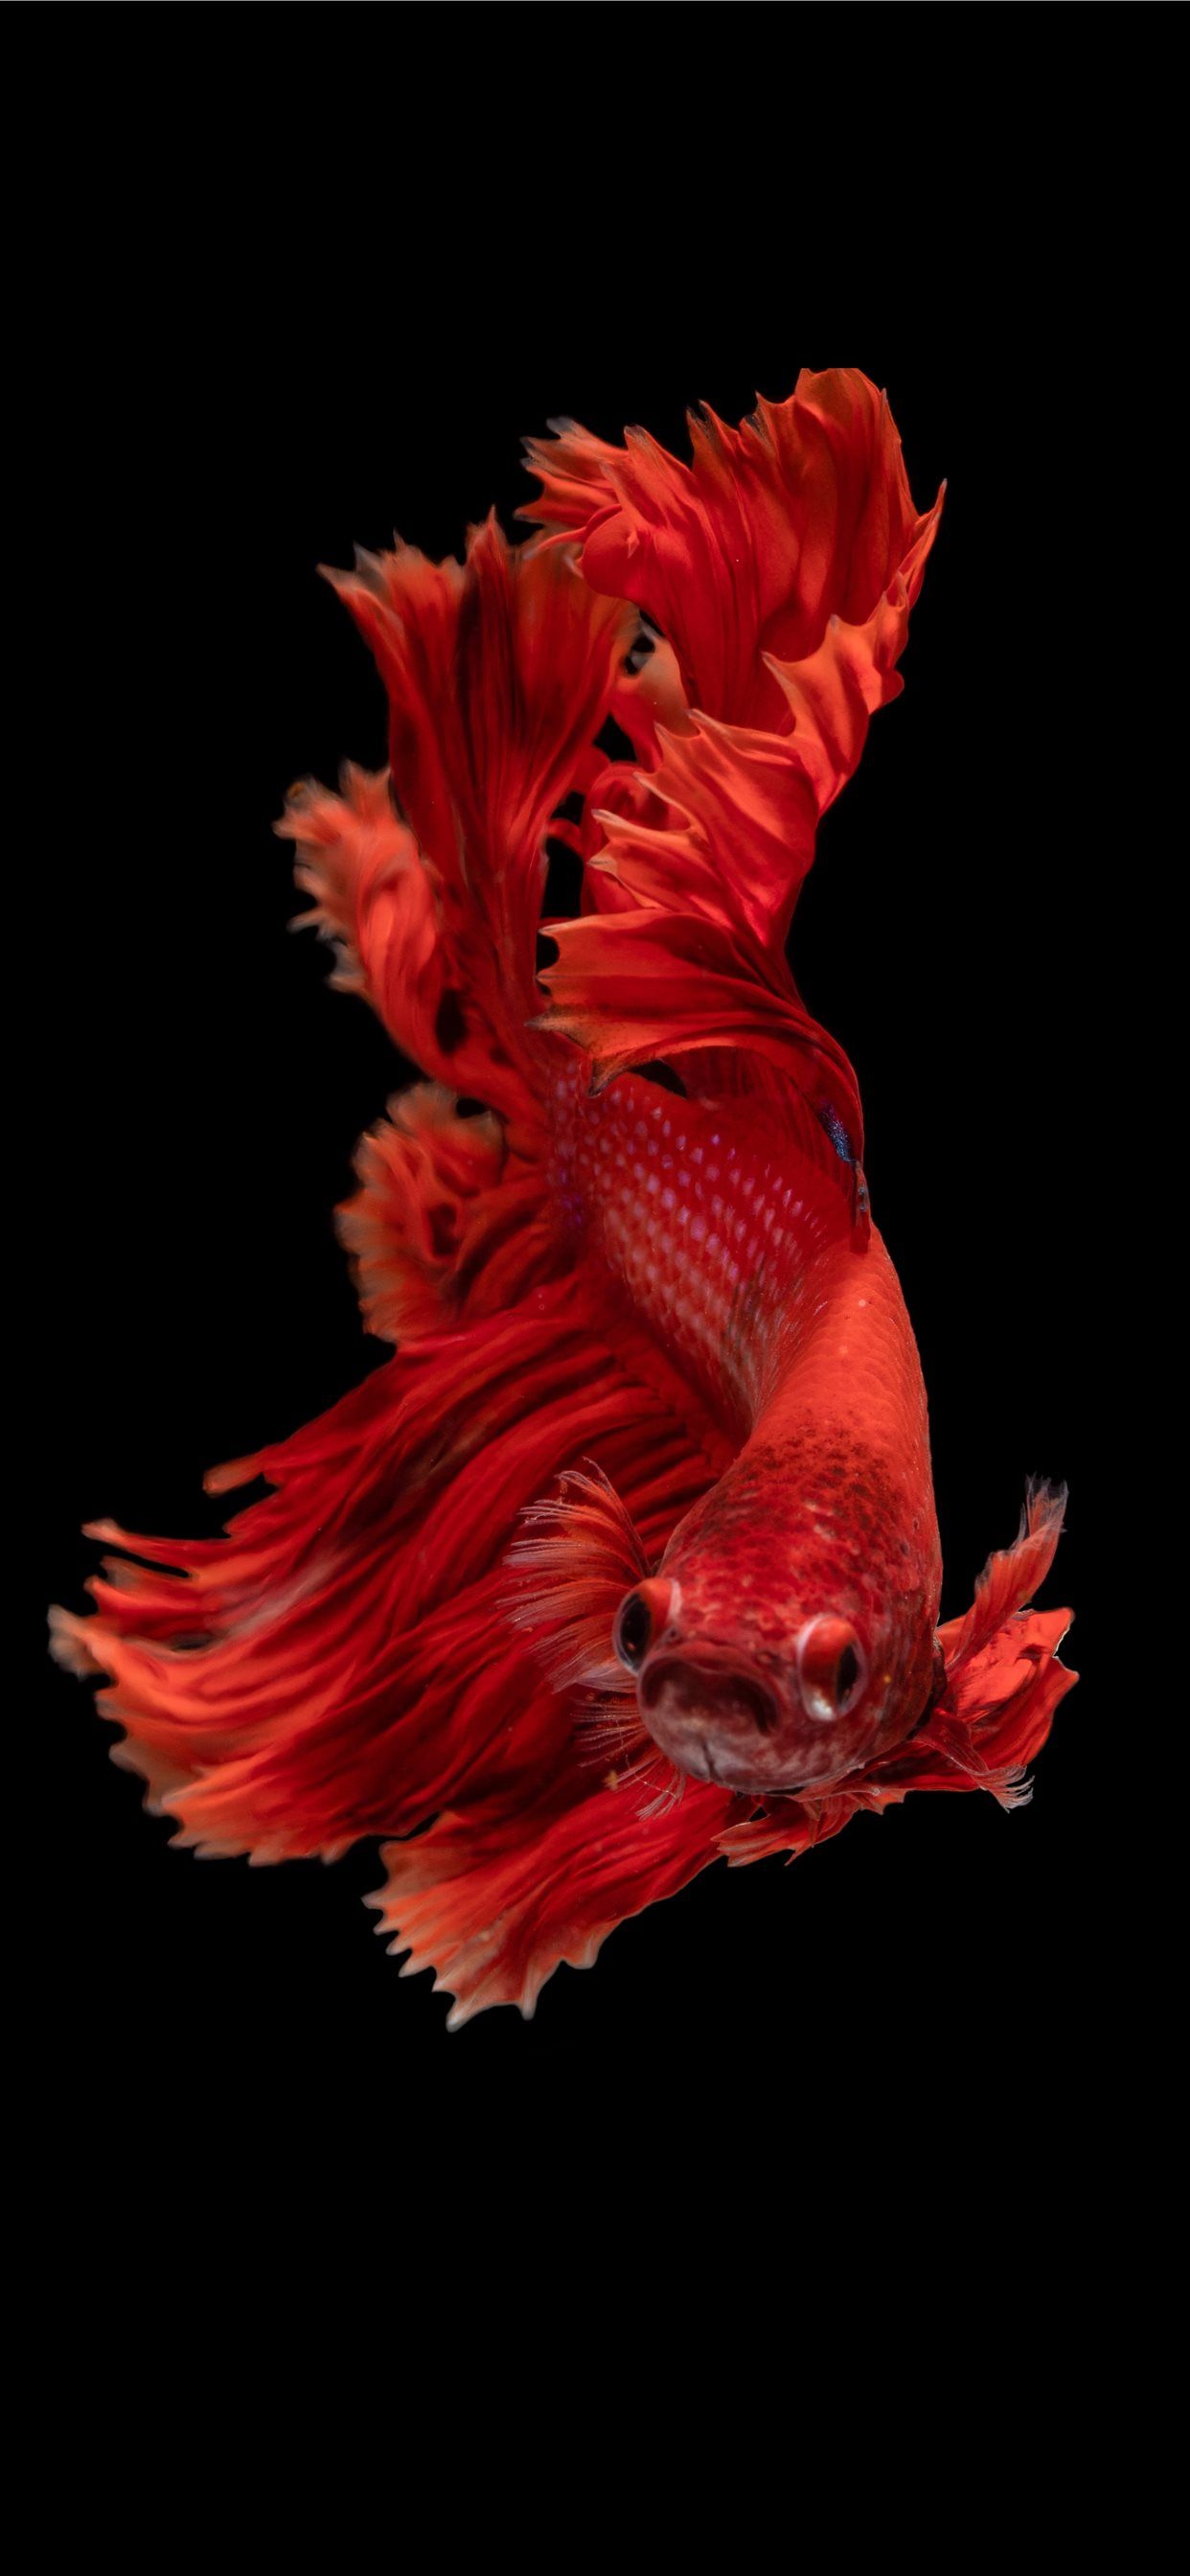 red Siamese fighting fish iPhone Wallpaper Free Download